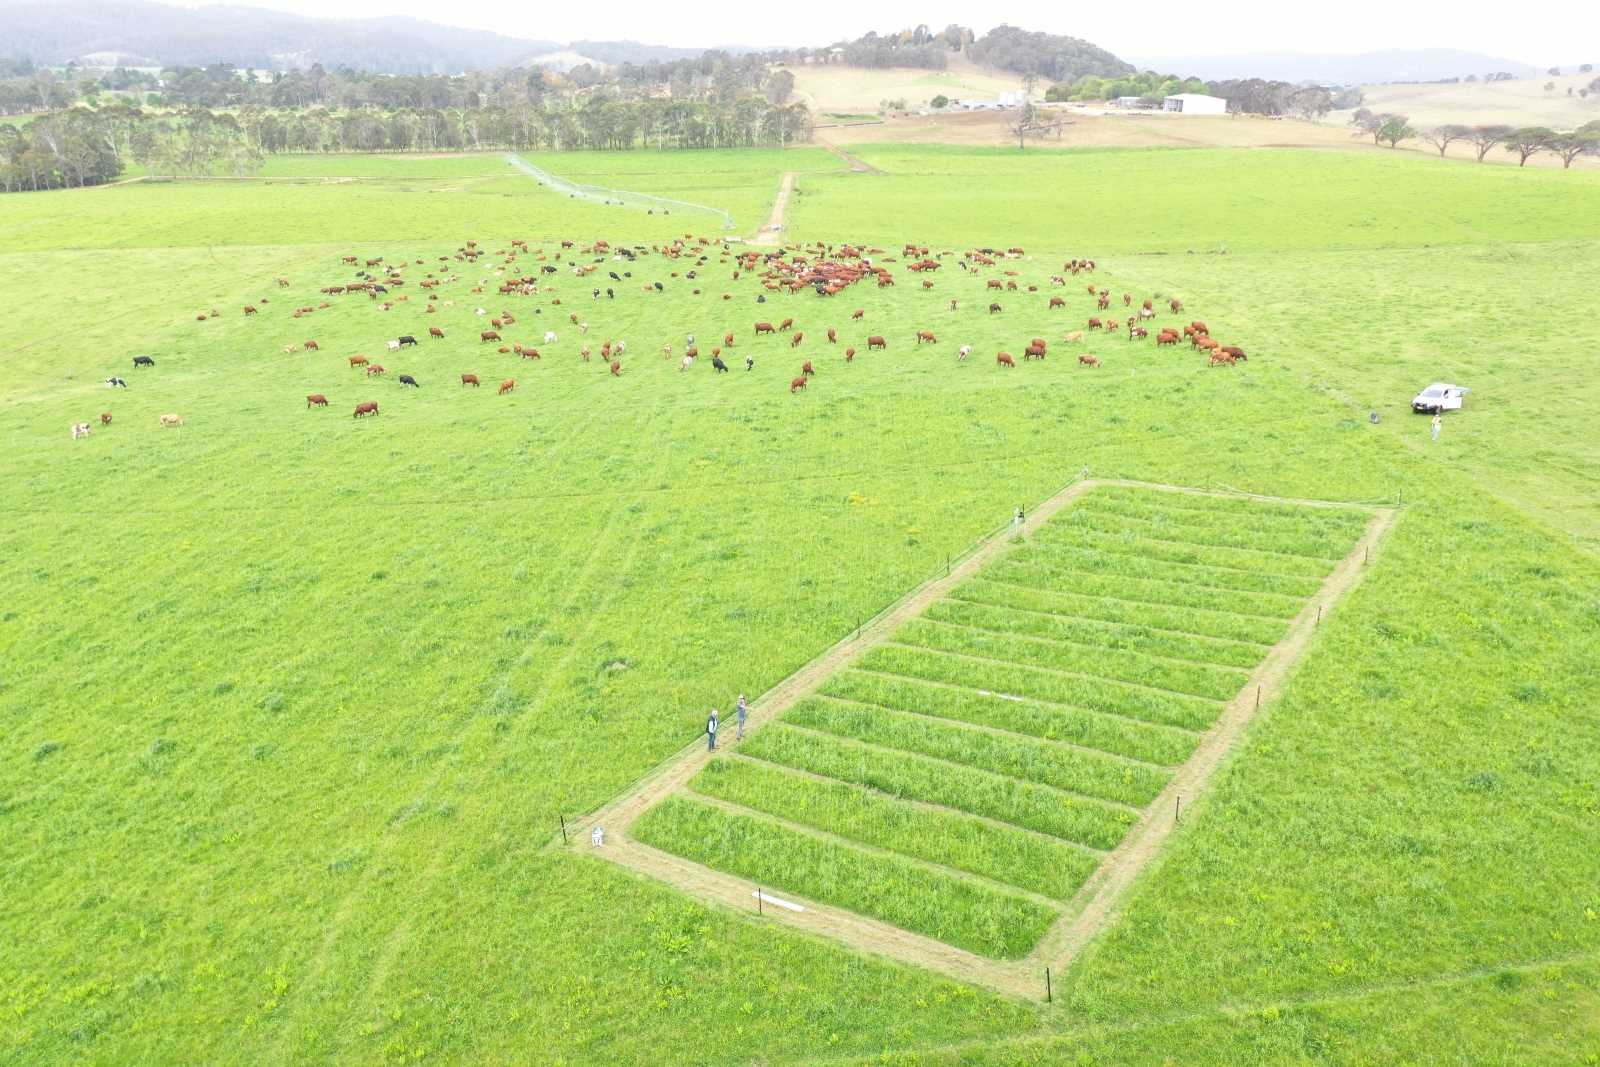 Image aerial view of a grassy paddock with dairy cows and a fenced off area used for trialing impacts of nutrients on pasture. 